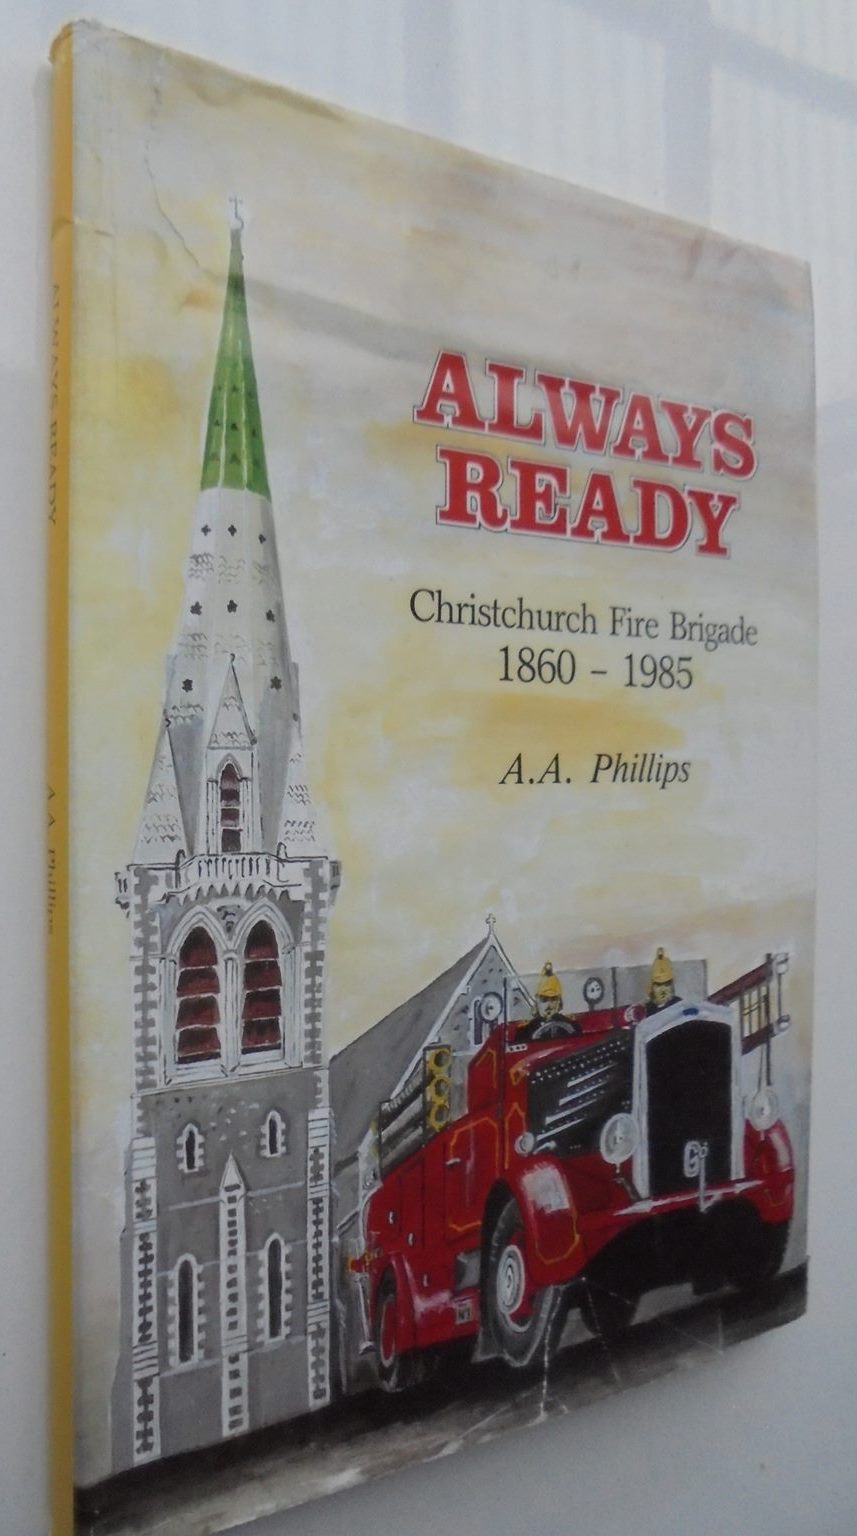 Always Ready: Christchurch Fire Brigade 1860-1985 by A.A Phillips.